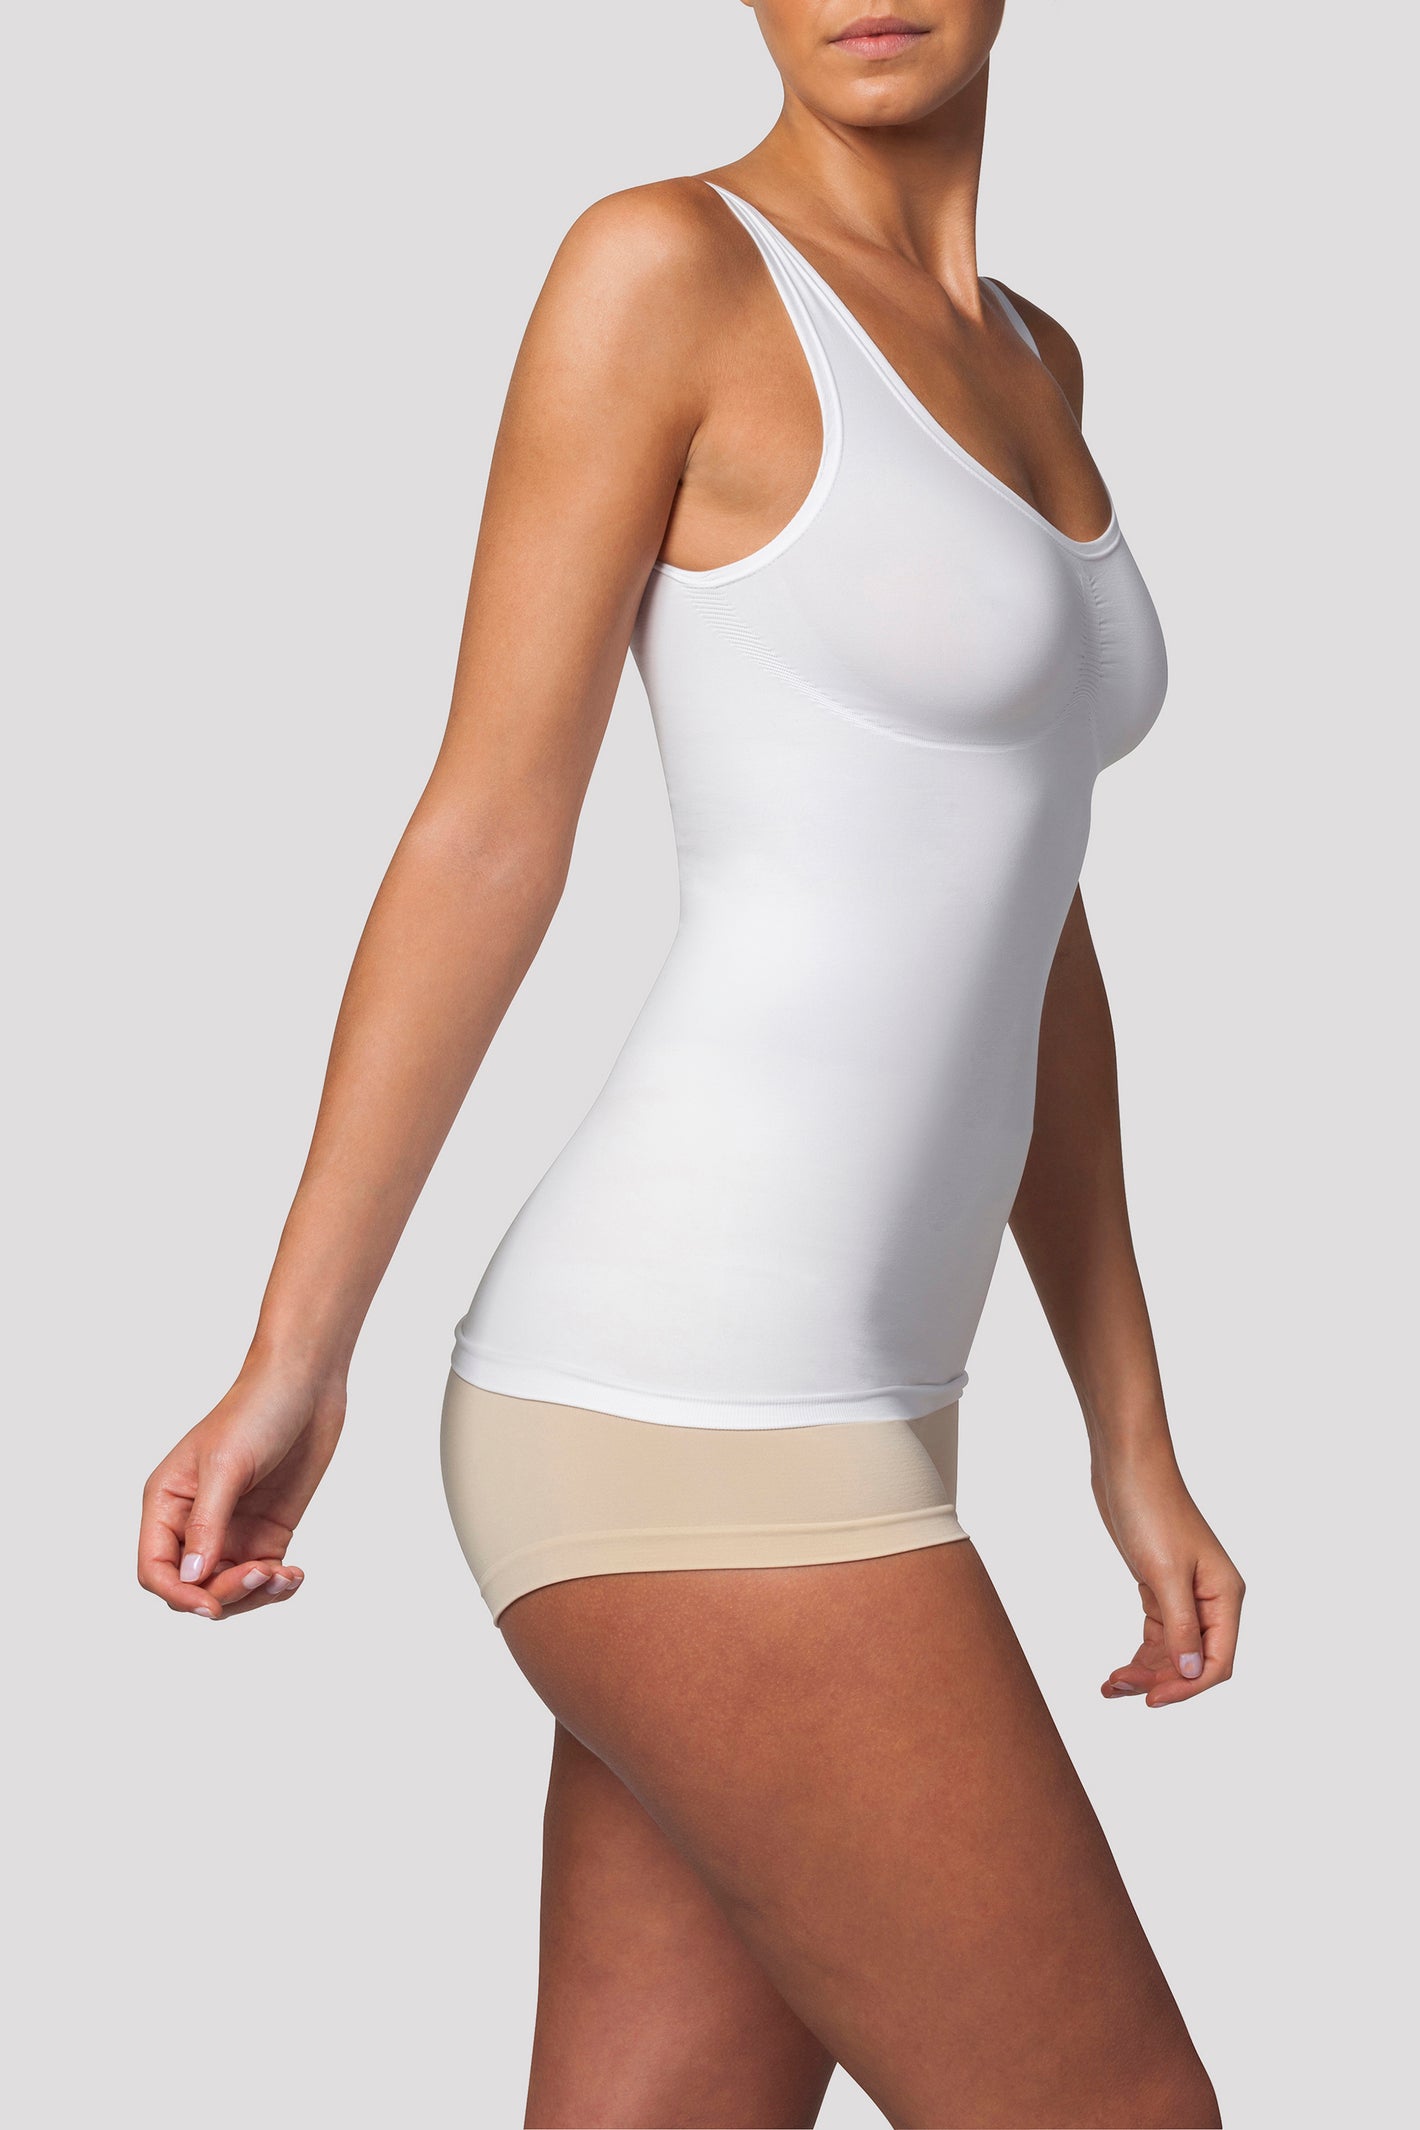 shapewear top with support for tummy control - White